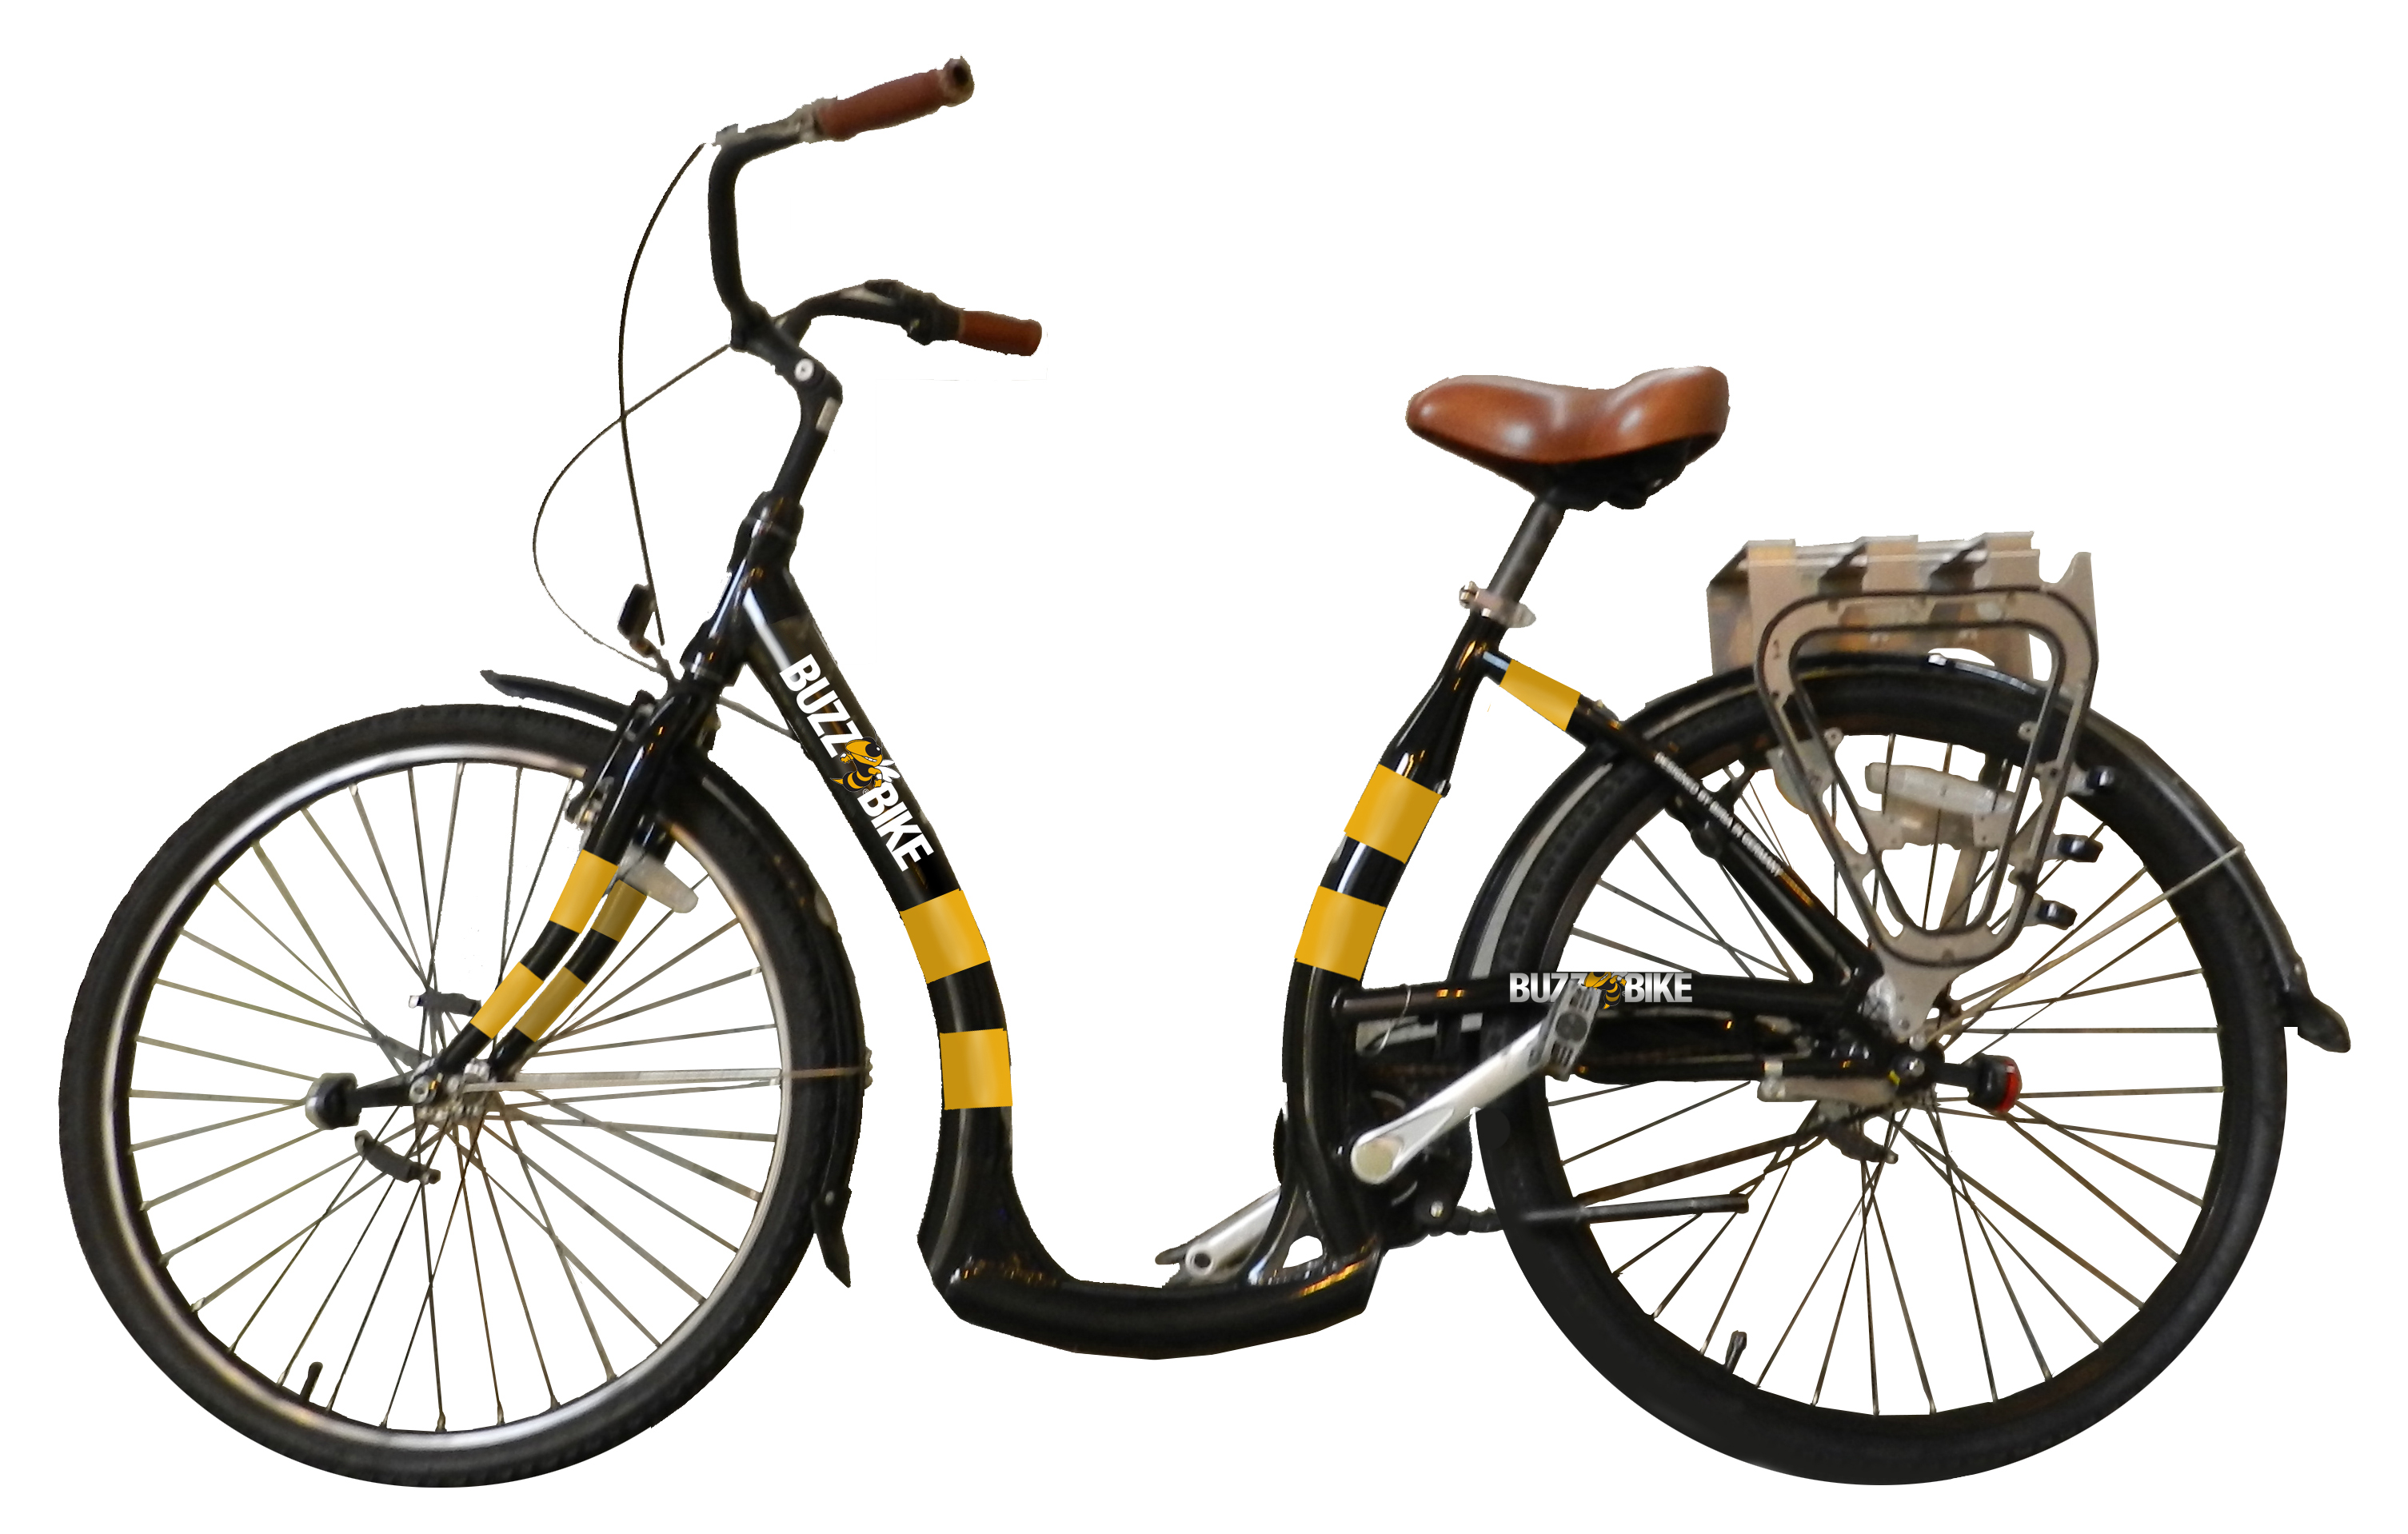 The BuzzBike program lets students rent bikes on a semesterly basis. The bikes provided are the Biria Easy Boarding 3 model.